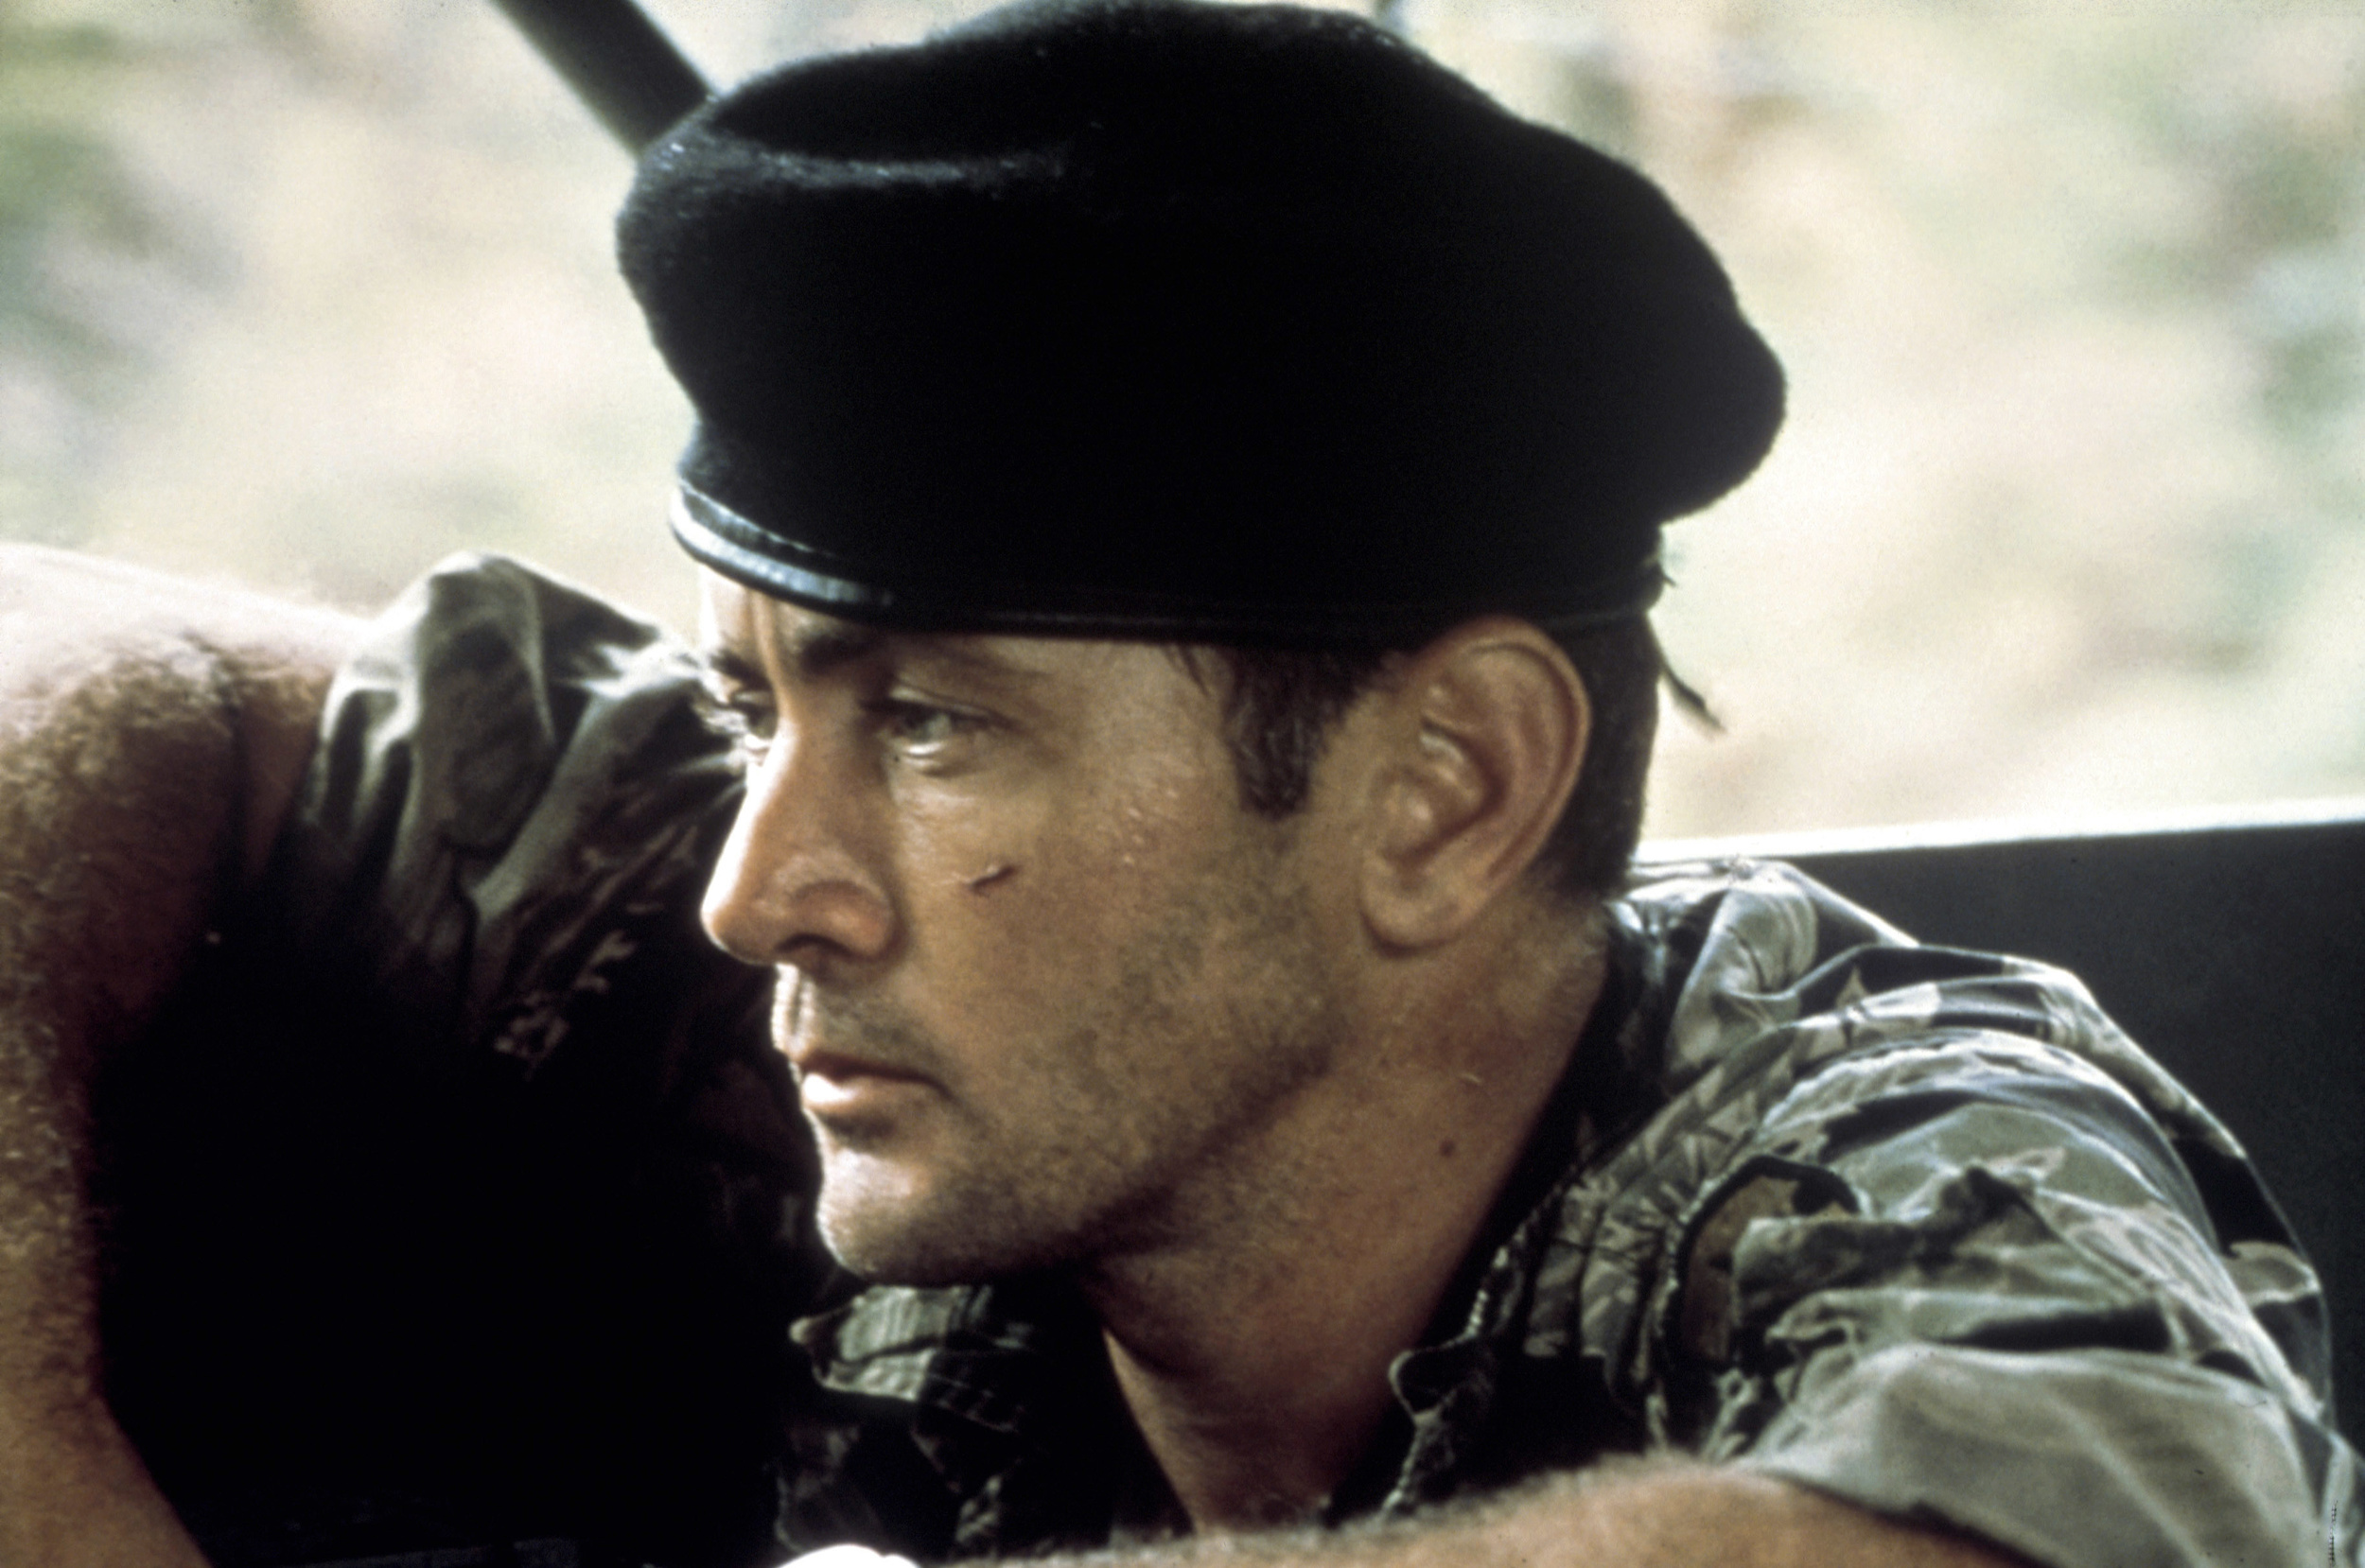 <p>Francis Ford Coppola’s war epic is full of memorable moments and iconic lines, which is probably a relief to him, given that the film almost killed him. That includes the opening of the film, when a distraught Captain Willard laments, “Saigon. Shıt. I’m still only in Saigon.”</p><p>You may also like: <a href='https://www.yardbarker.com/entertainment/articles/was_1993_the_greatest_year_for_music_releases_102623/s1__38851821'>Was 1993 the greatest year for music releases?</a></p>